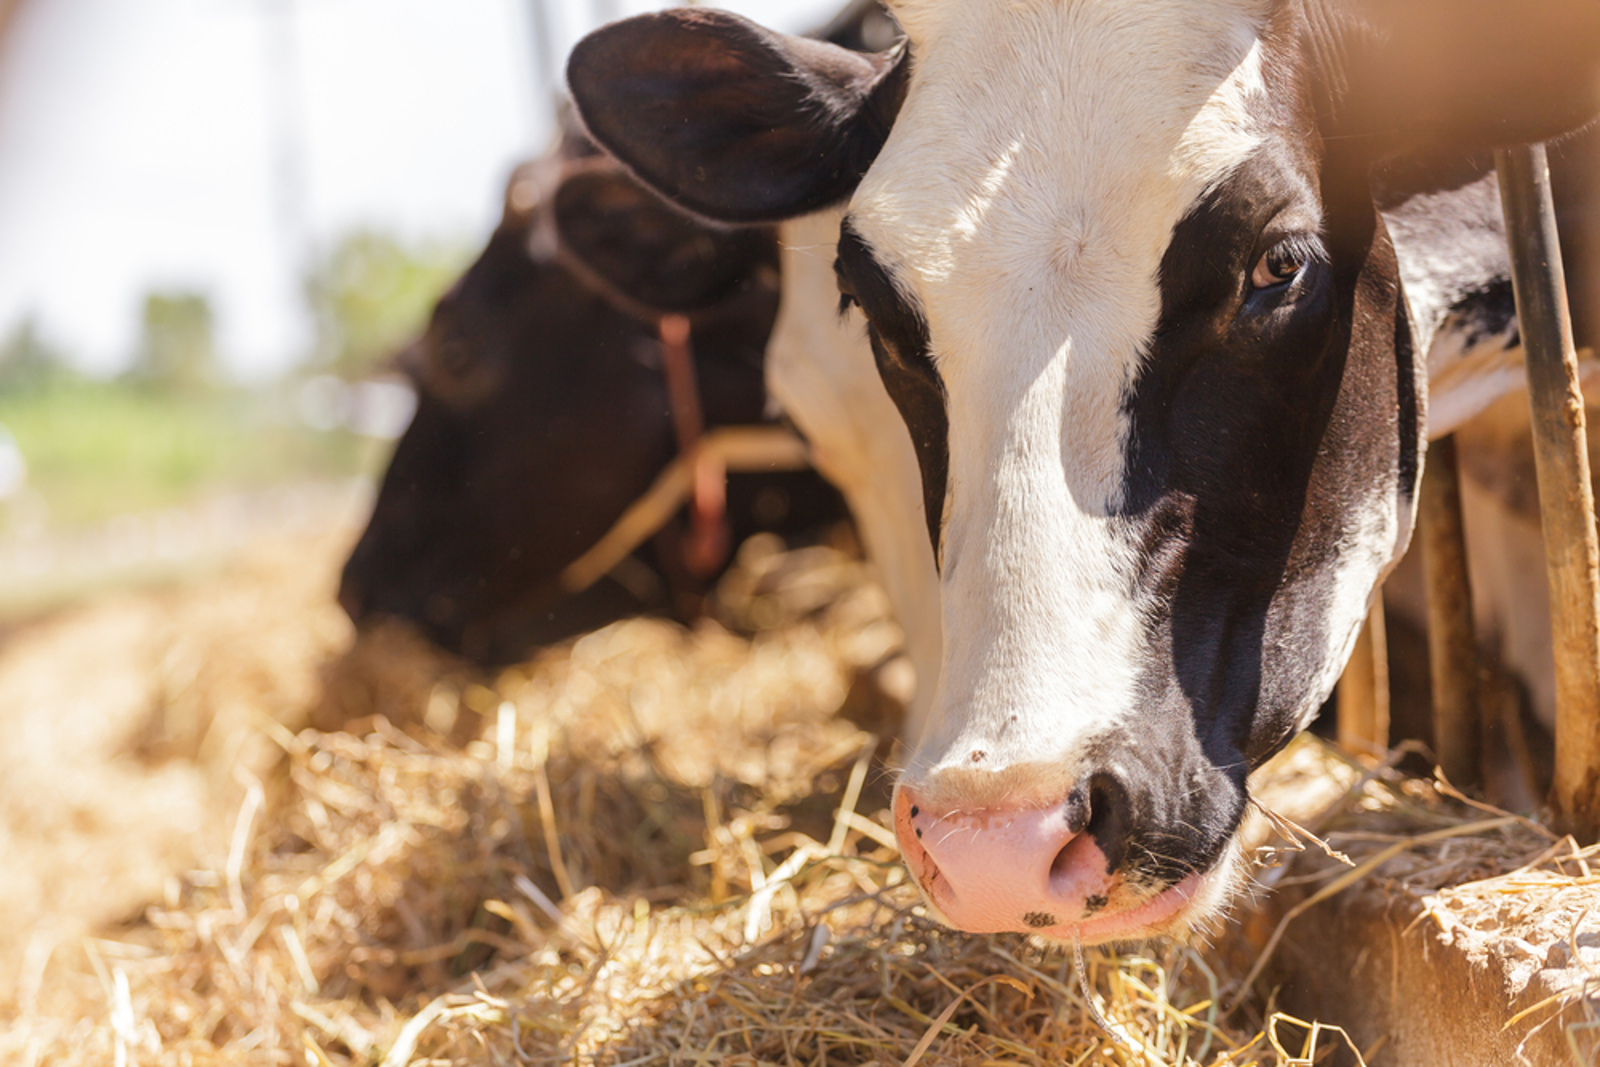 5 Facts About Animal Agriculture and Air Pollution That You Just Can’t Argued With